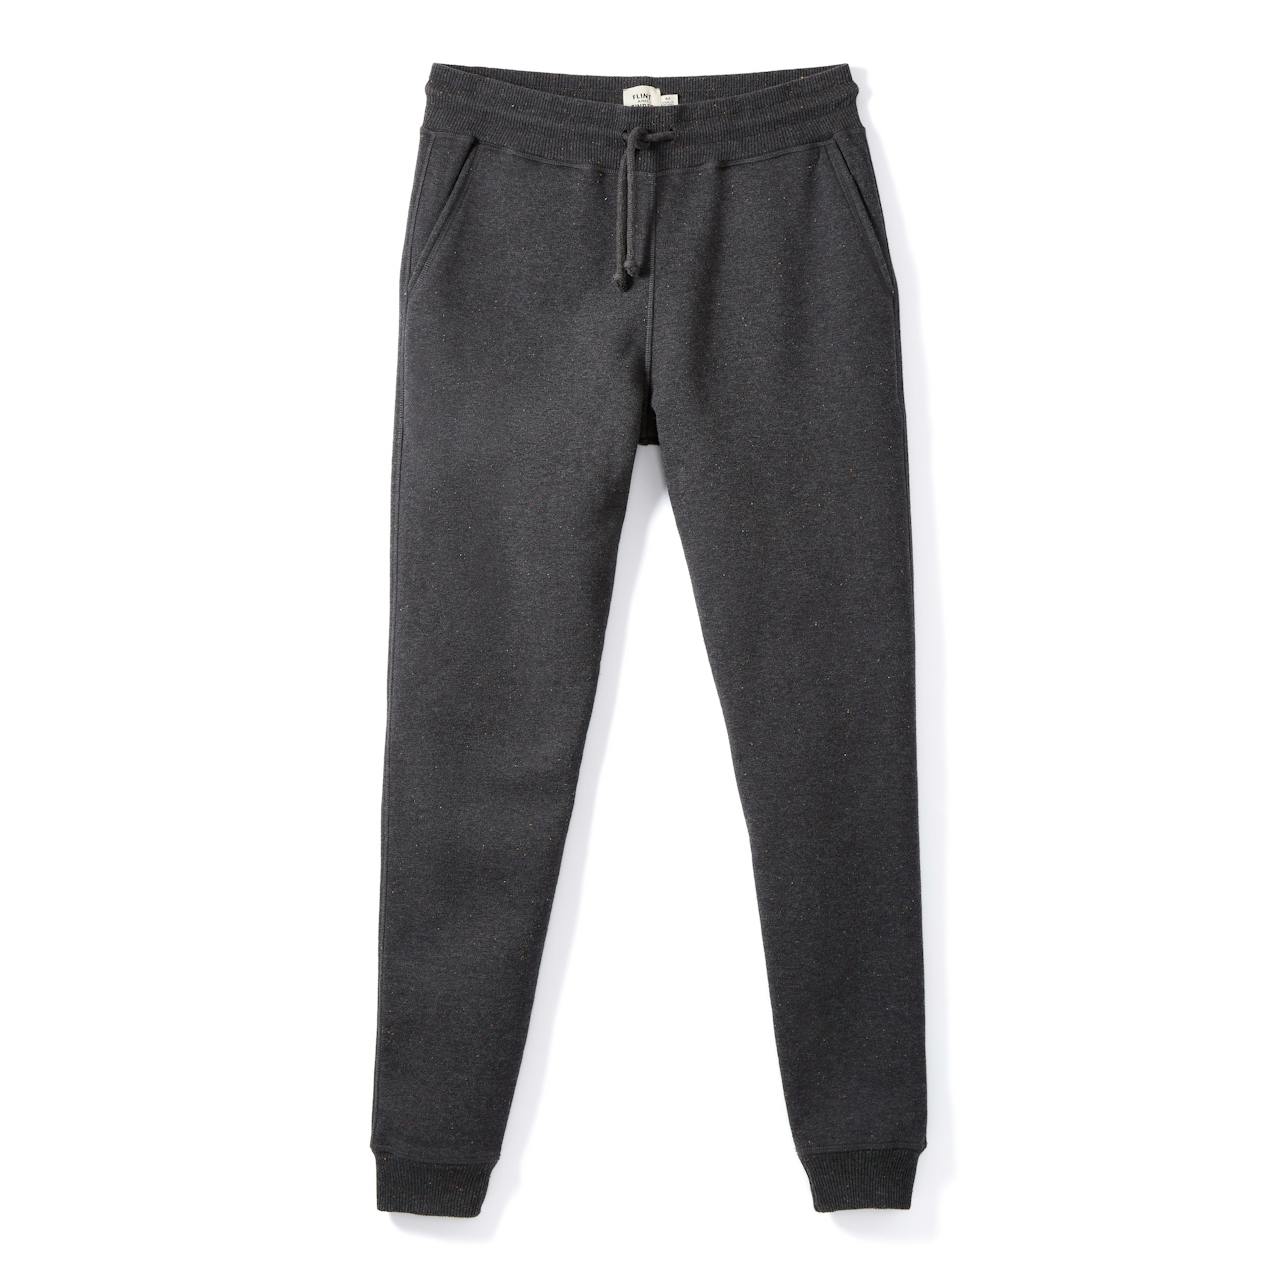 Keep Your Legs Warm With These Sherpa Lined Sweatpants From Flint And Tinder